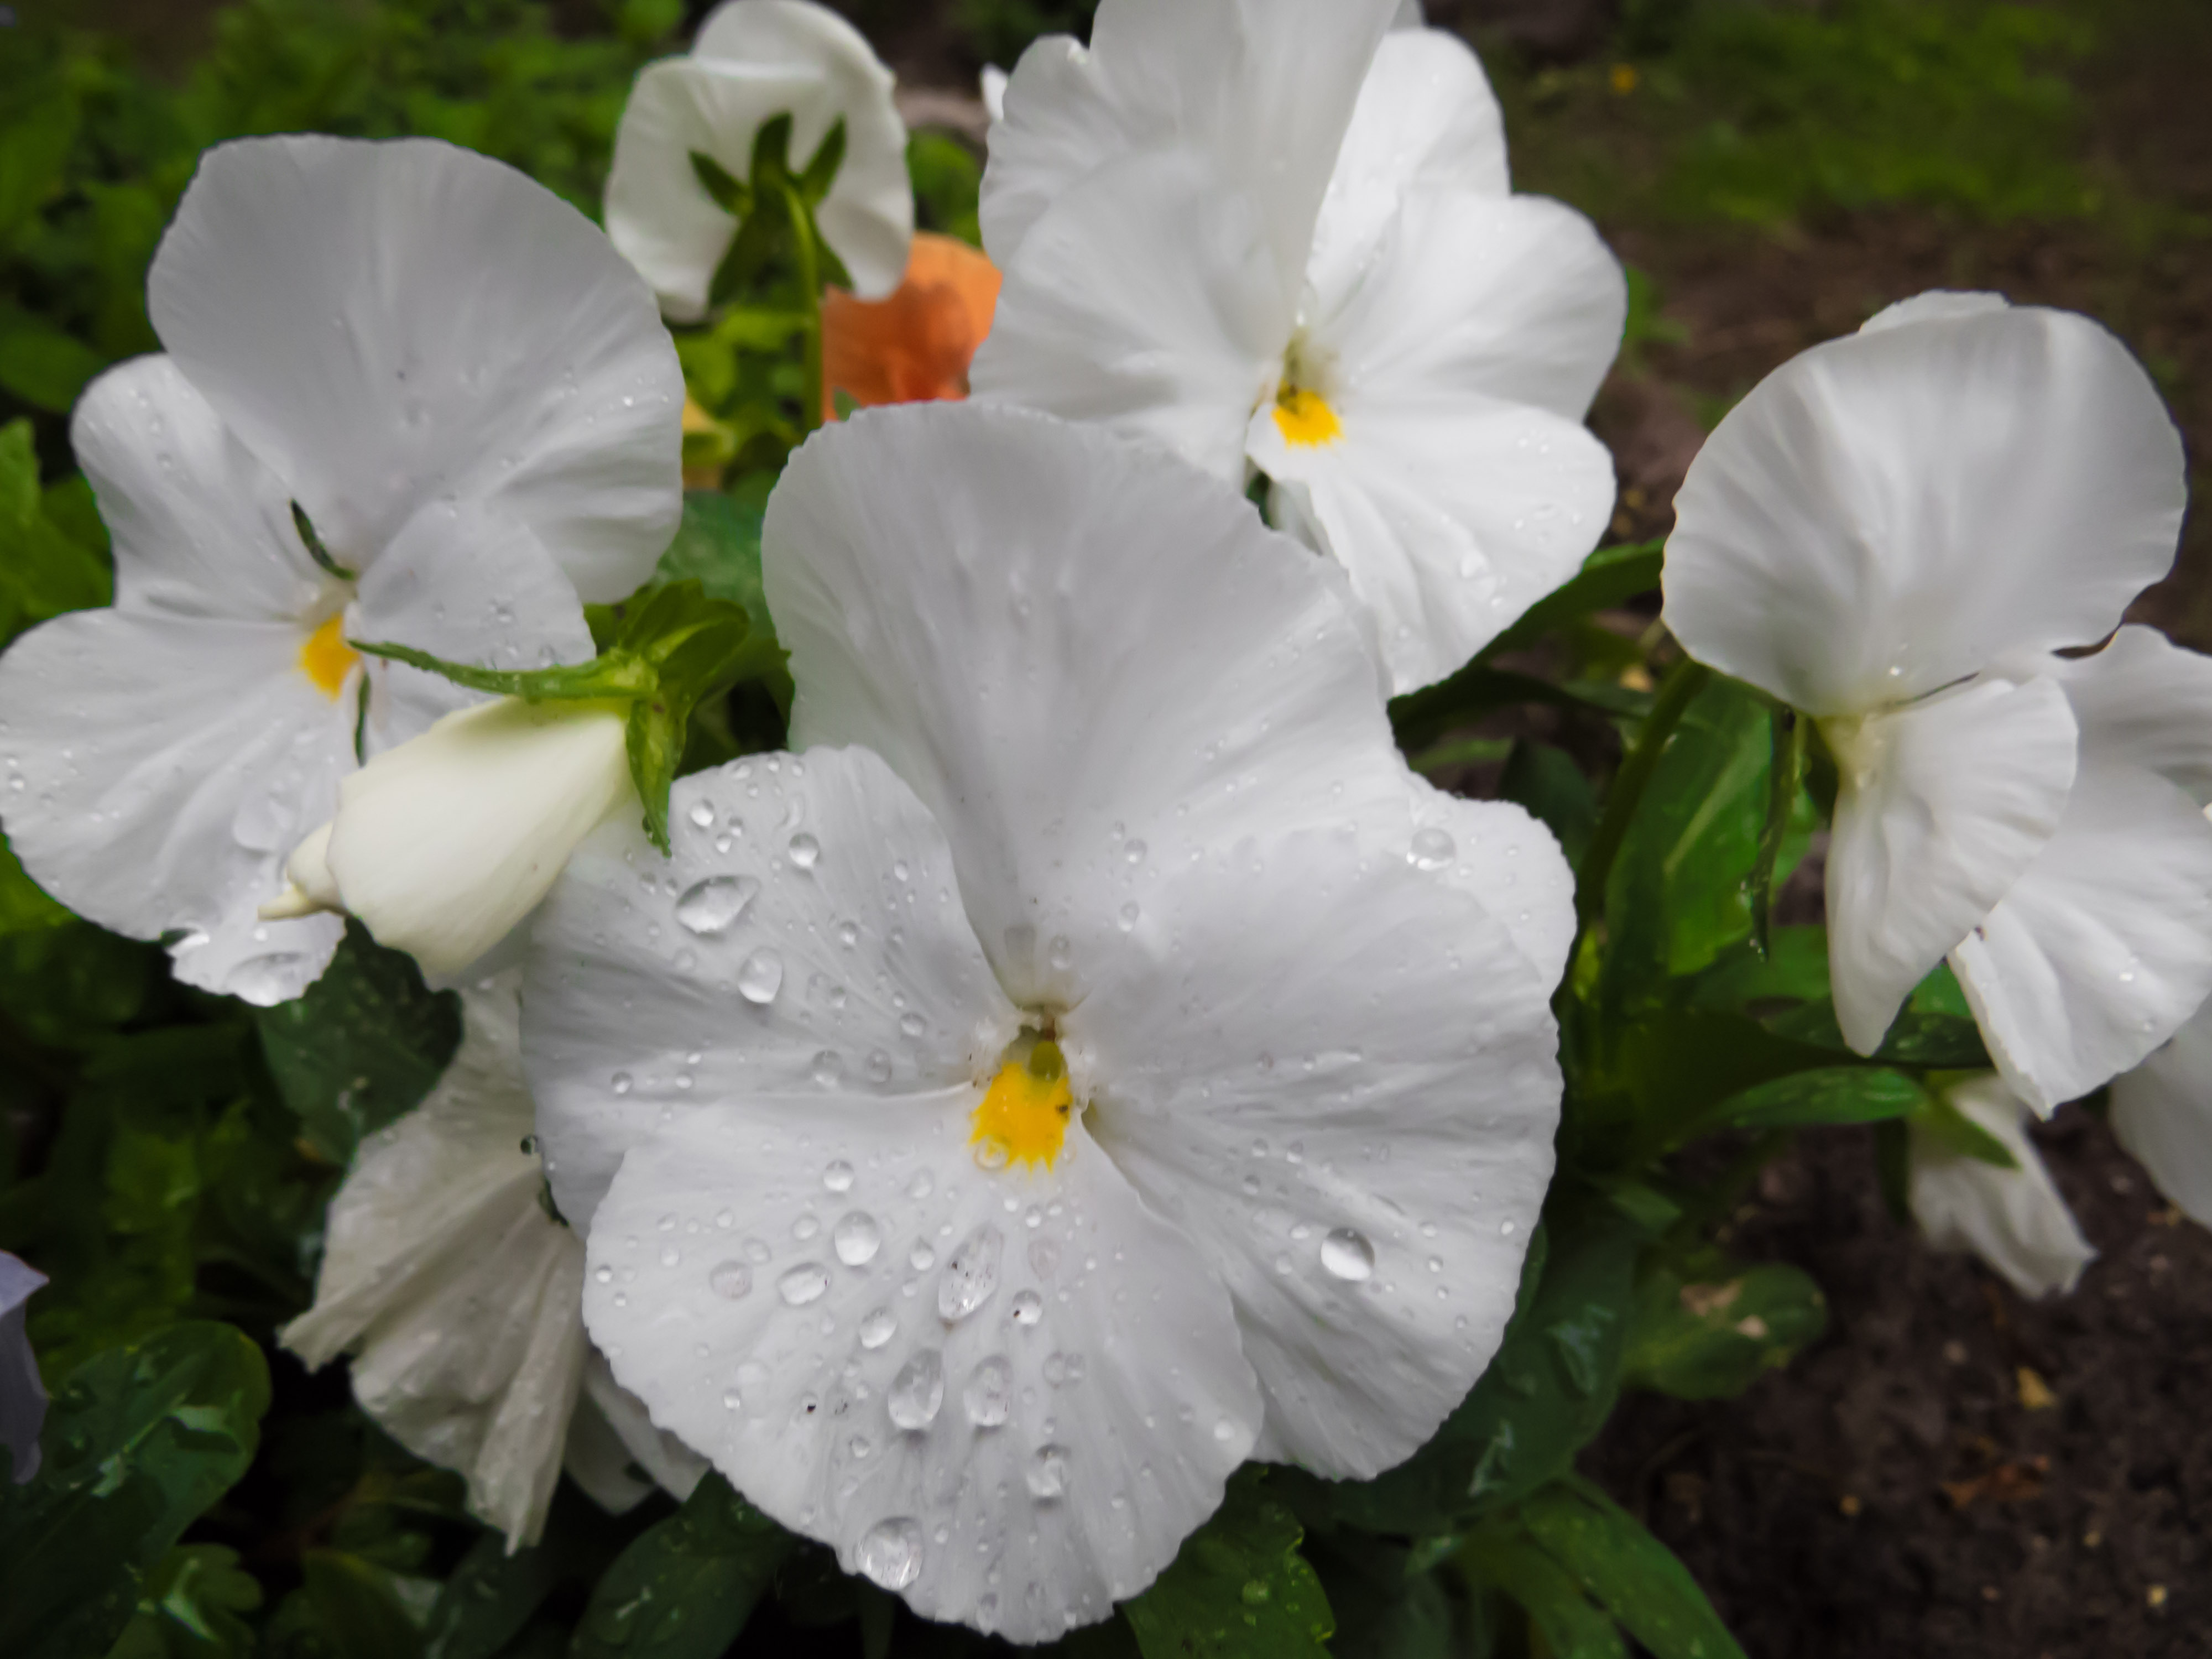 Flowers after the rain photo